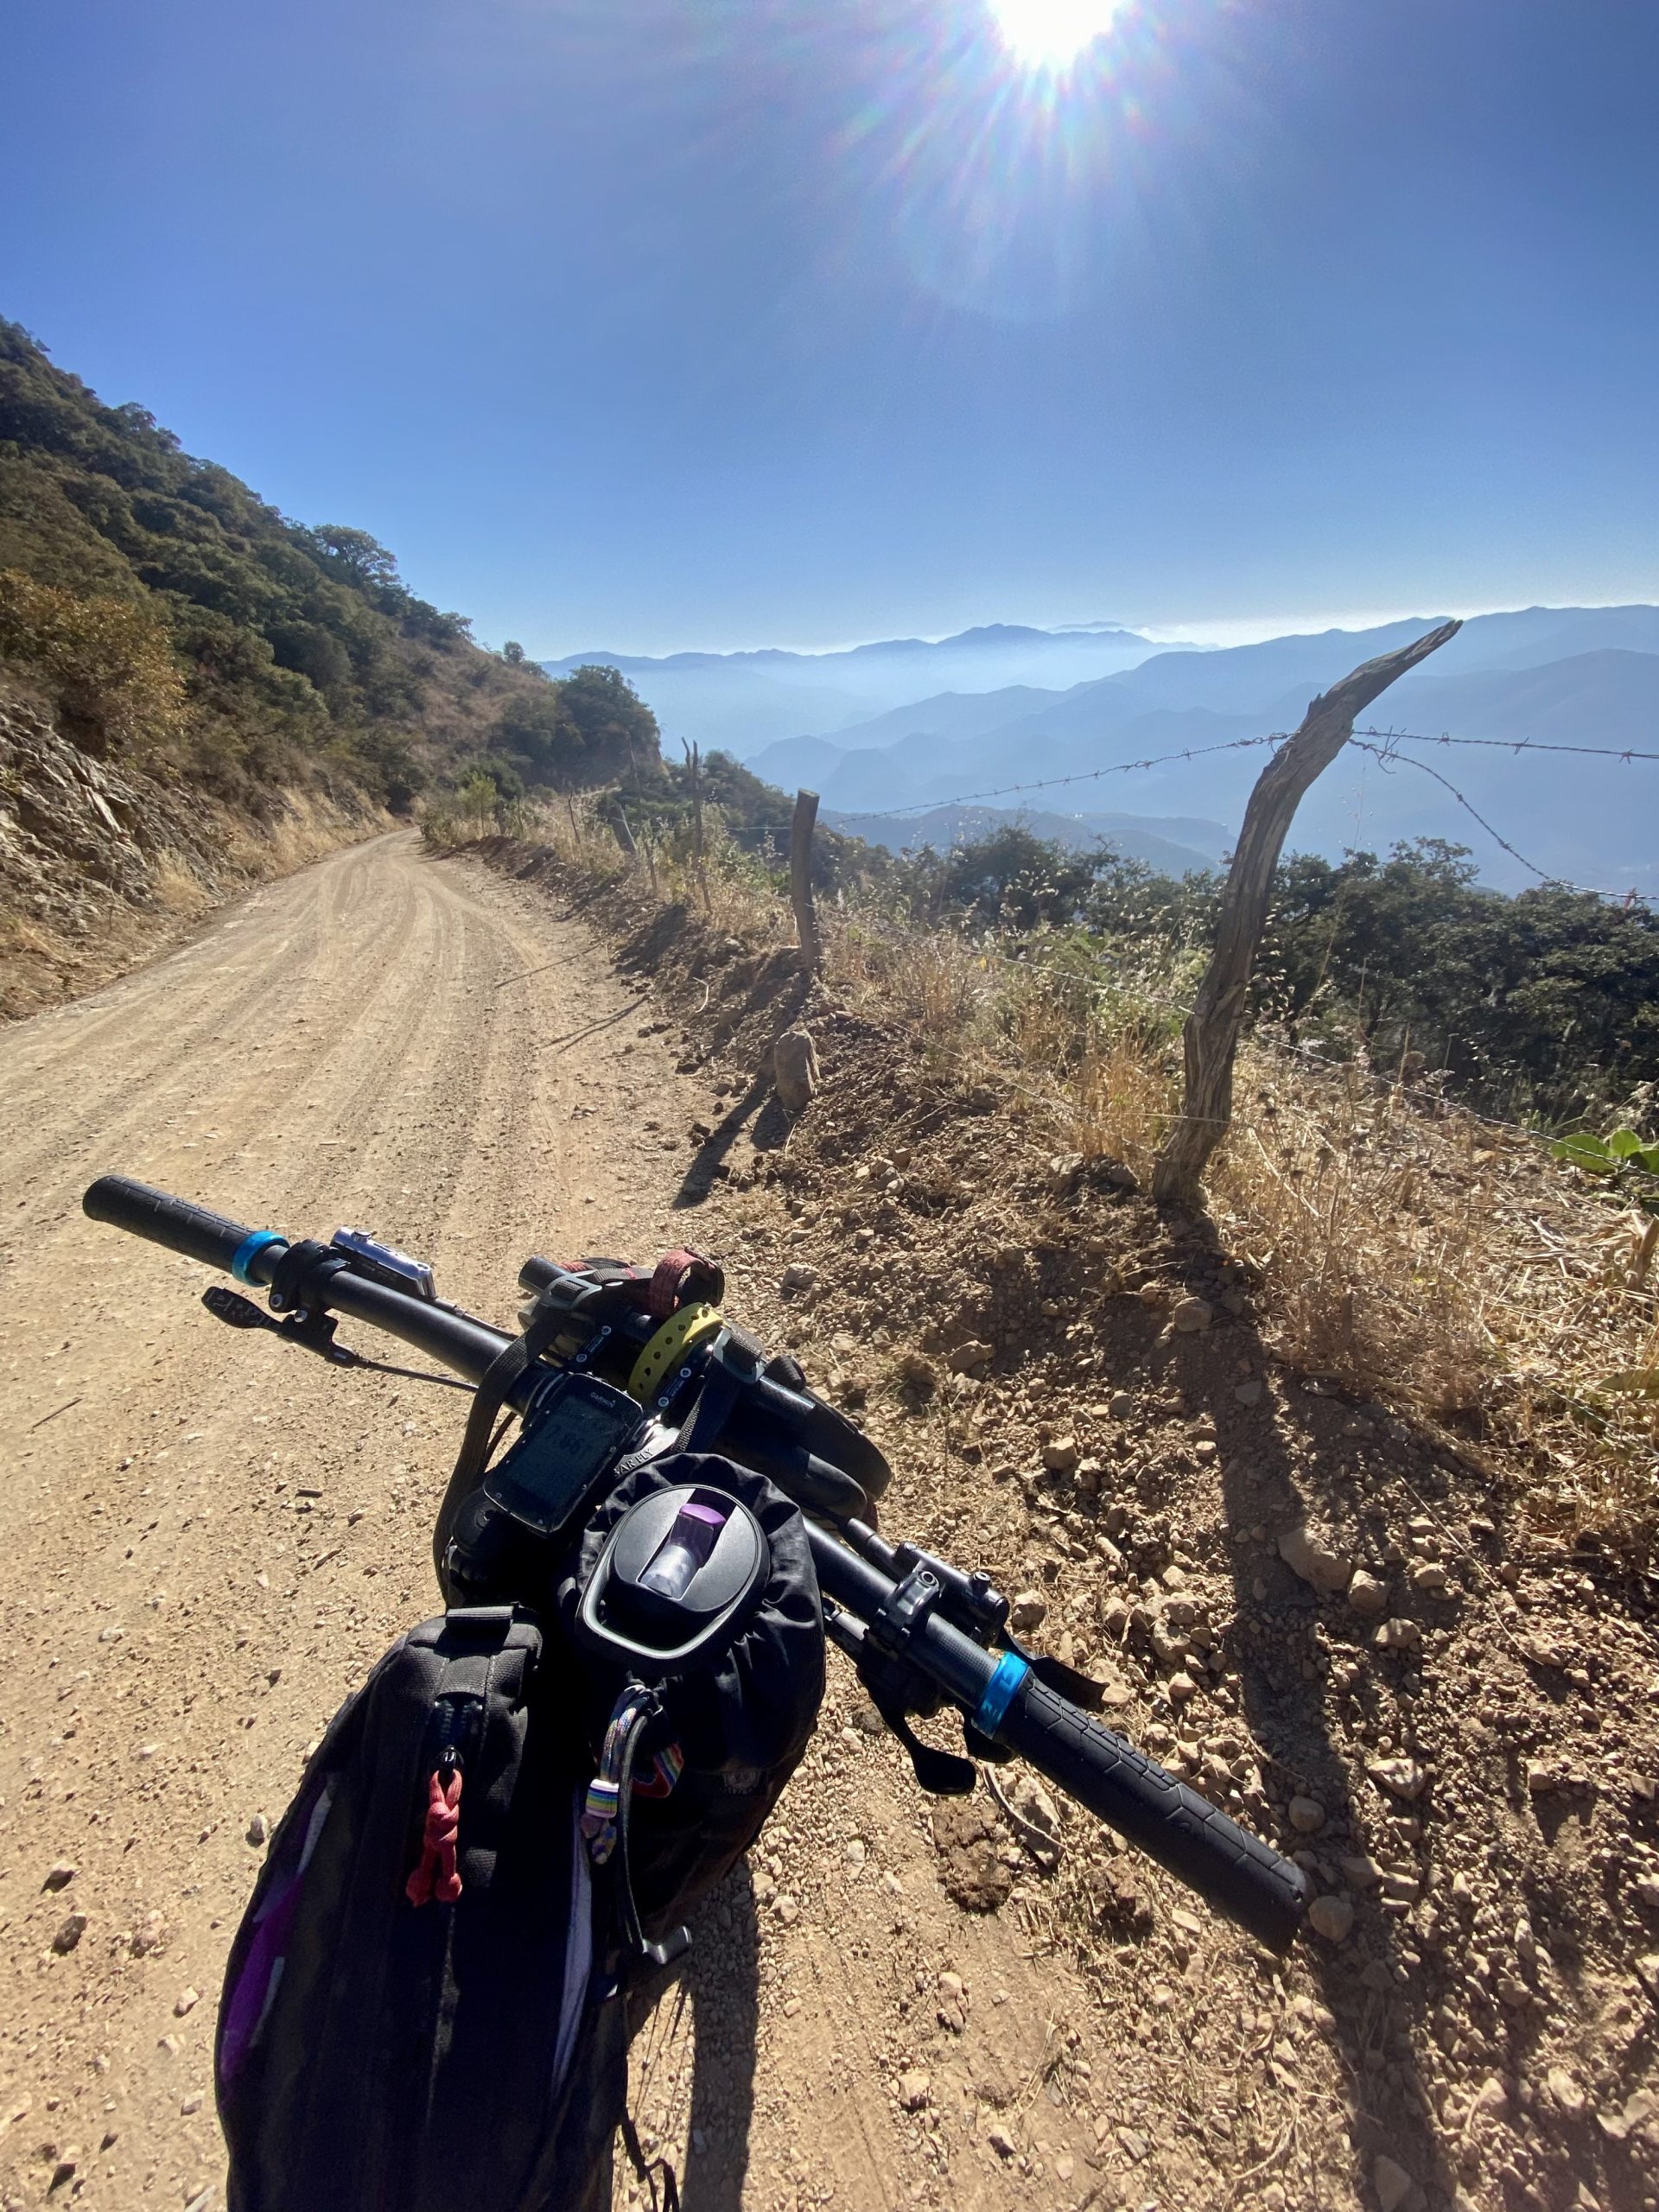 A mountain bike points down a gravel road in a chaparral landscape under a bright blue sky. The sun sparkles at the top of the frame. The road is deserted and the bike has a number of bags attached.